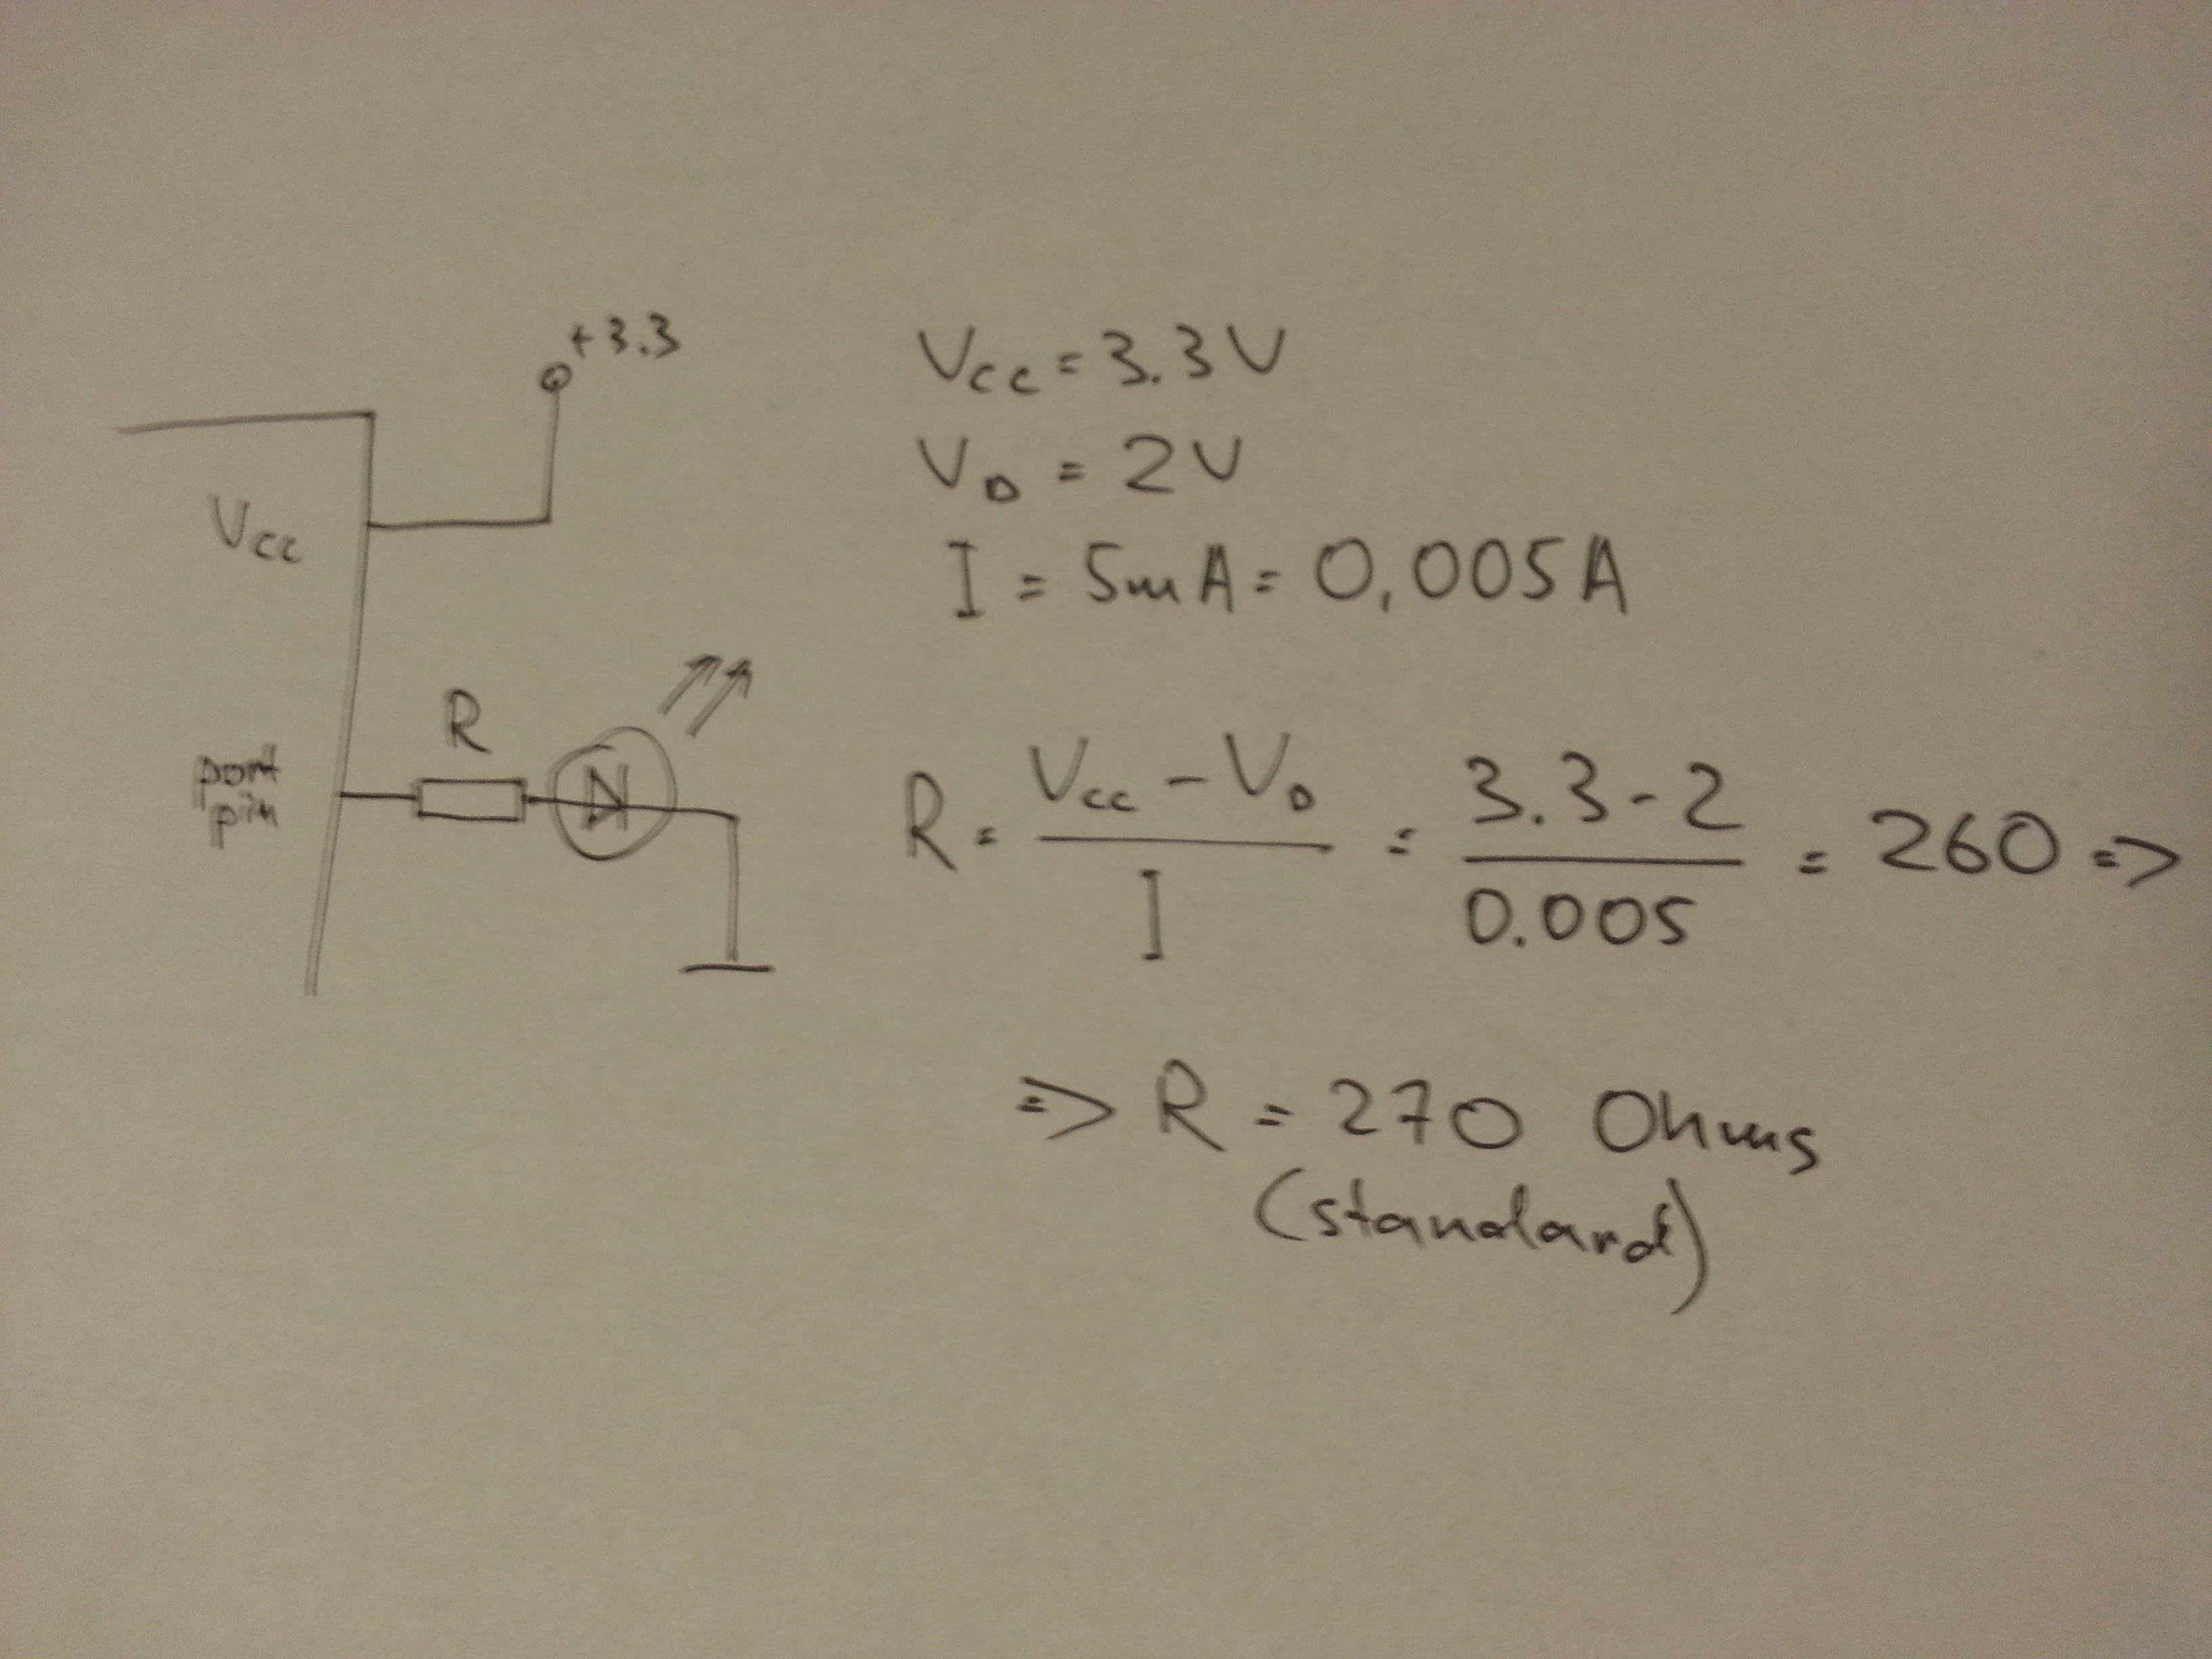 How to calculate the value of a current limiting resistor